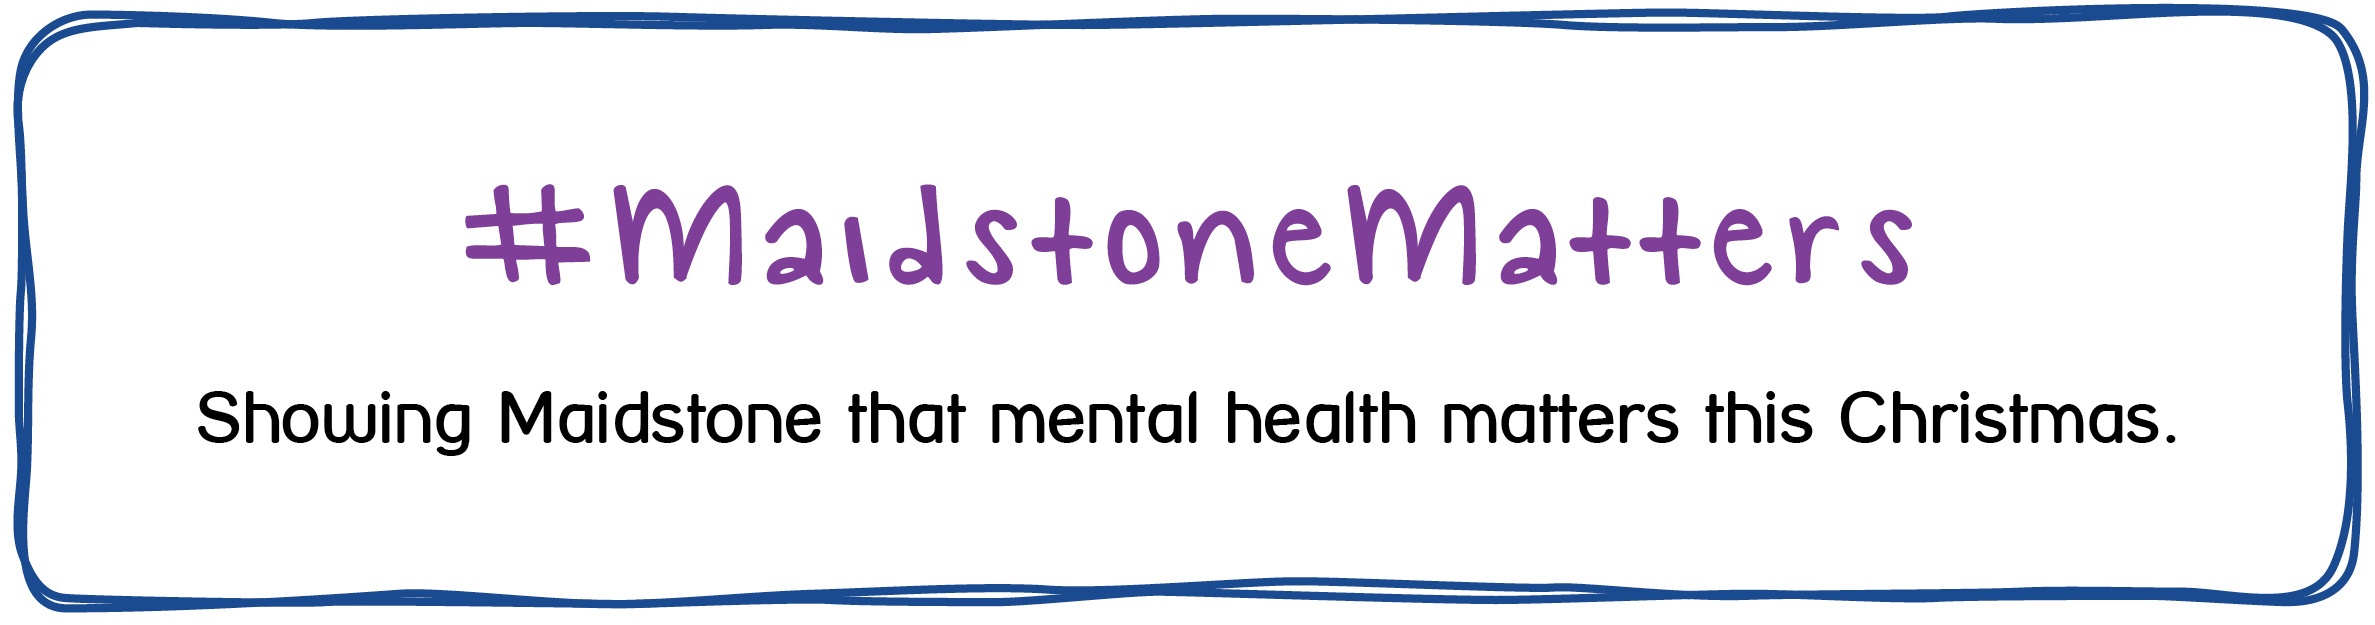 Maidstone Matters - Showing Maidstone that mental health matters this Christmas.